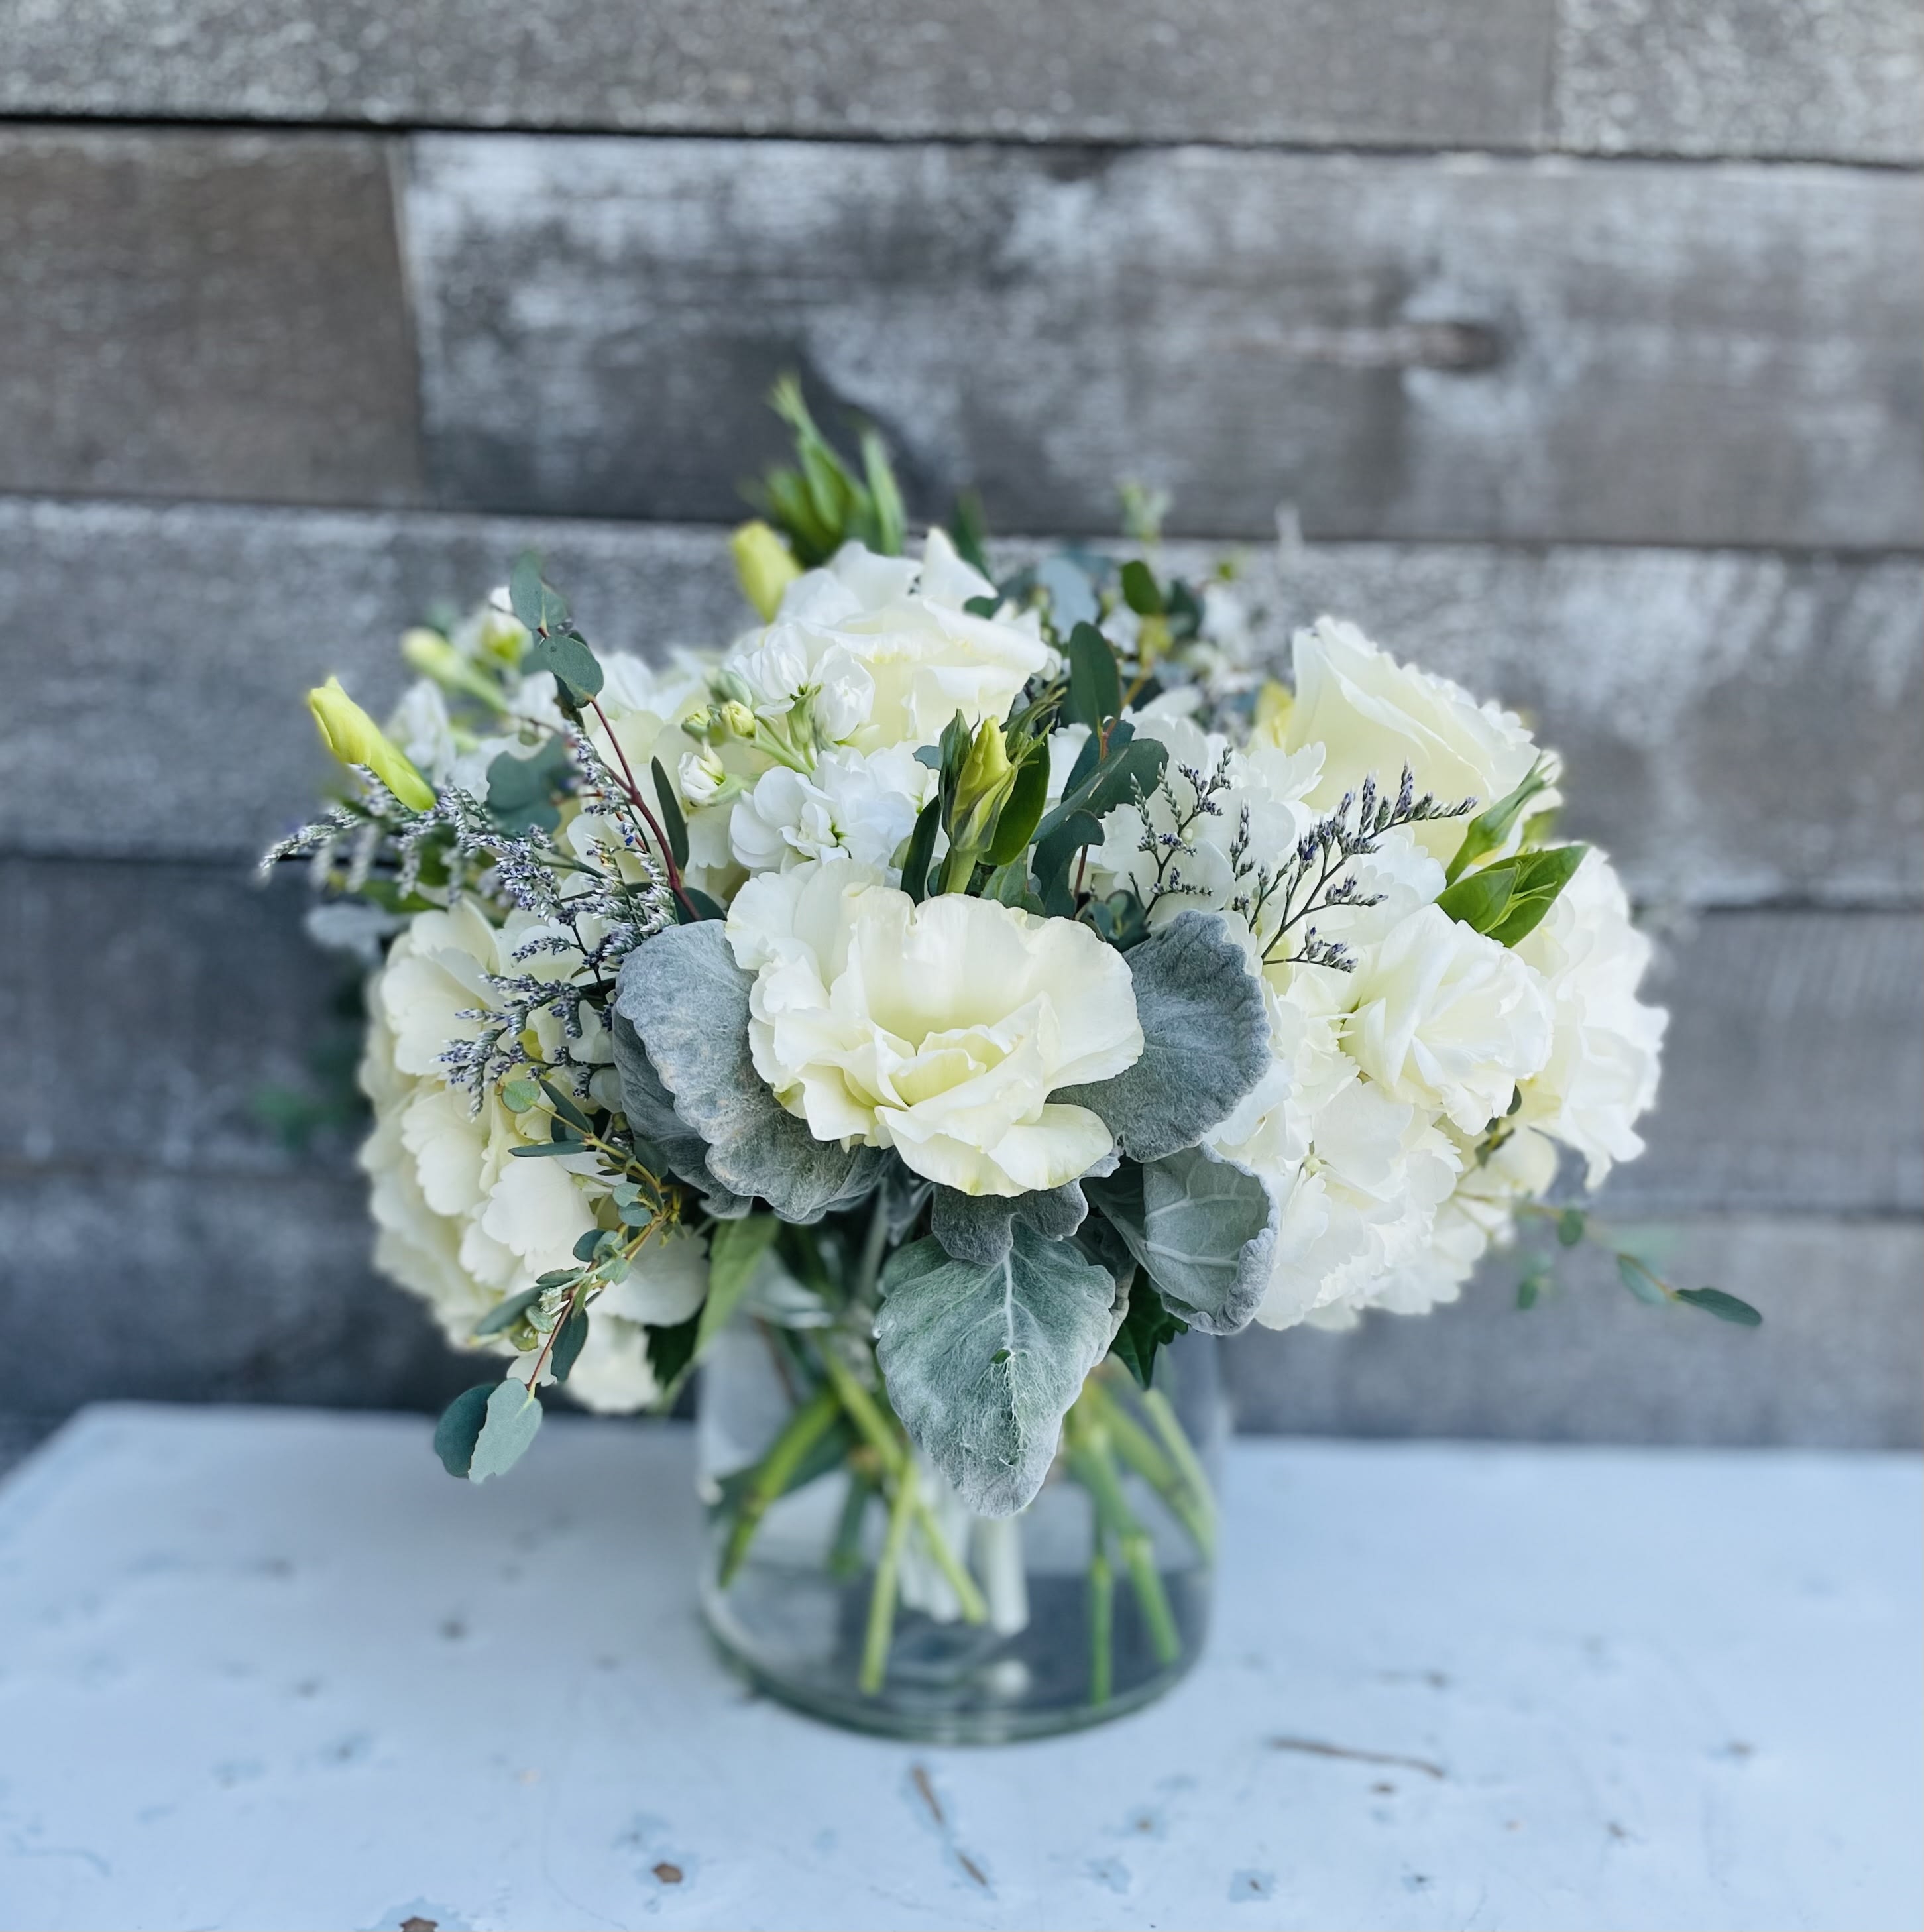 Nobility - White and dusted leaves with greens and white roses